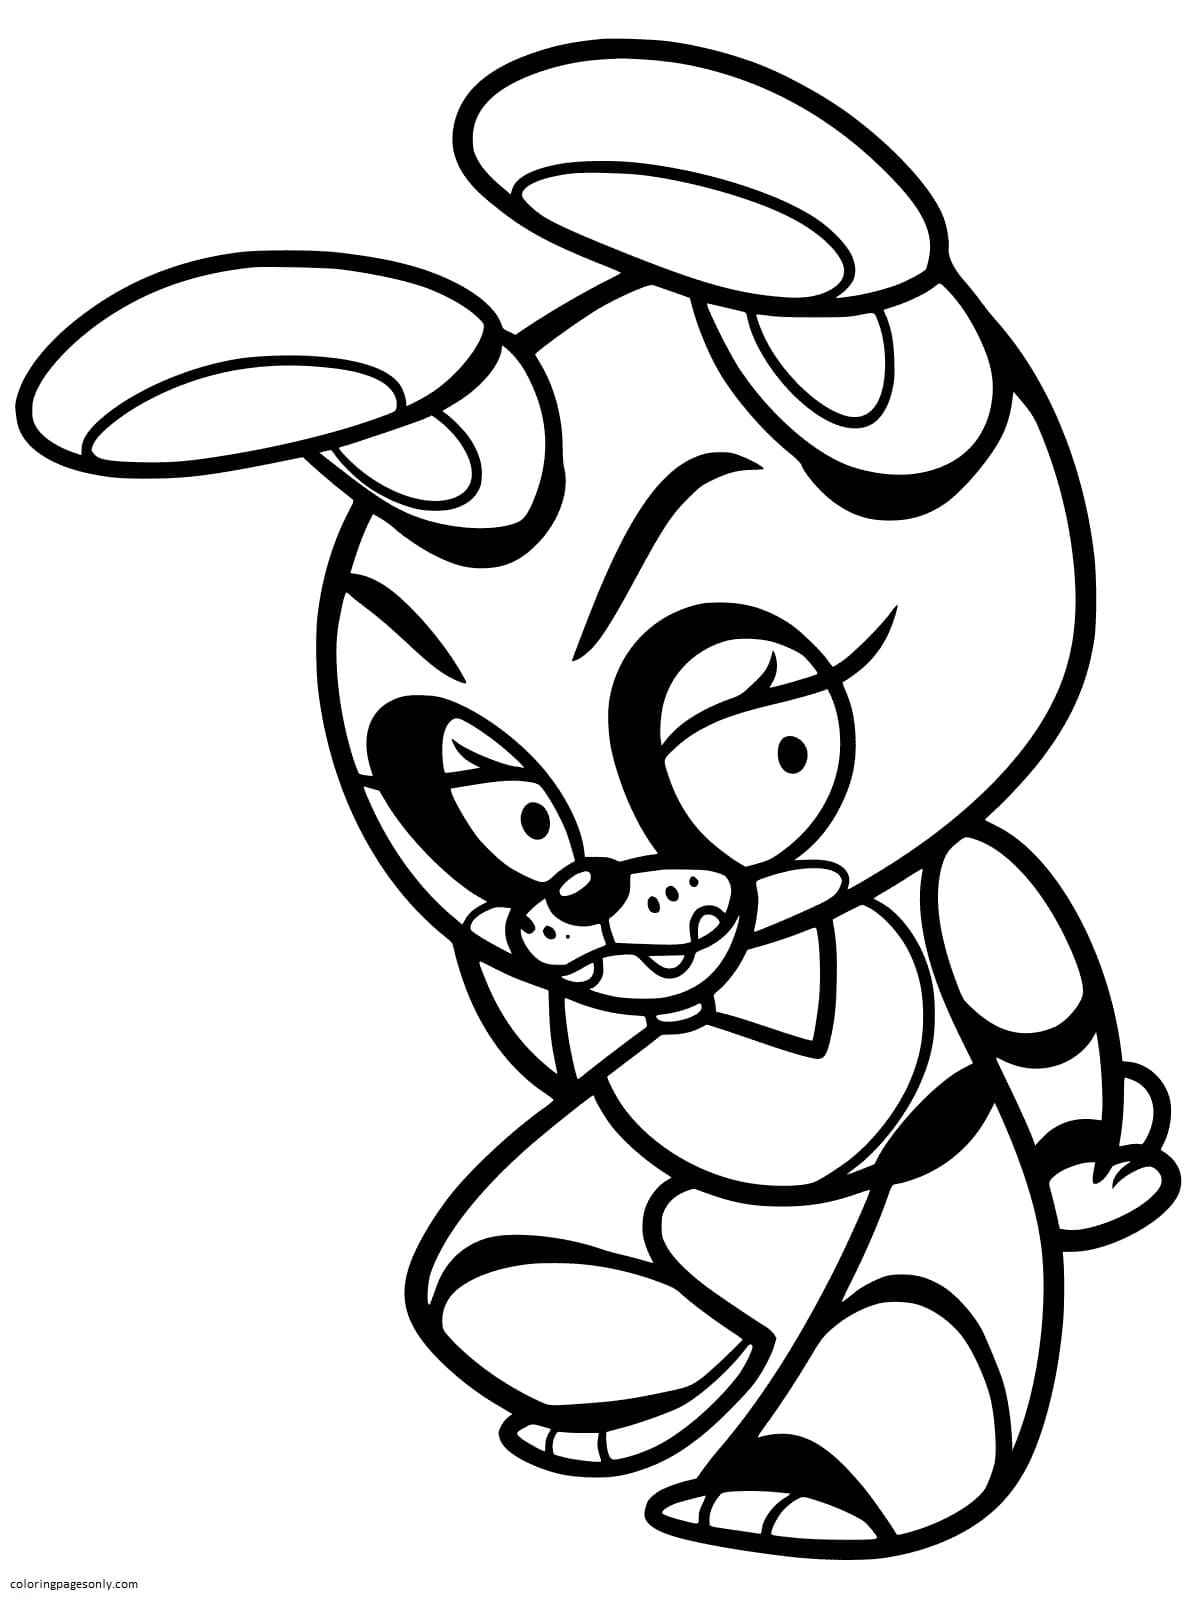 Five Nights at Freddy’s Toy Bonnie Coloring Pages